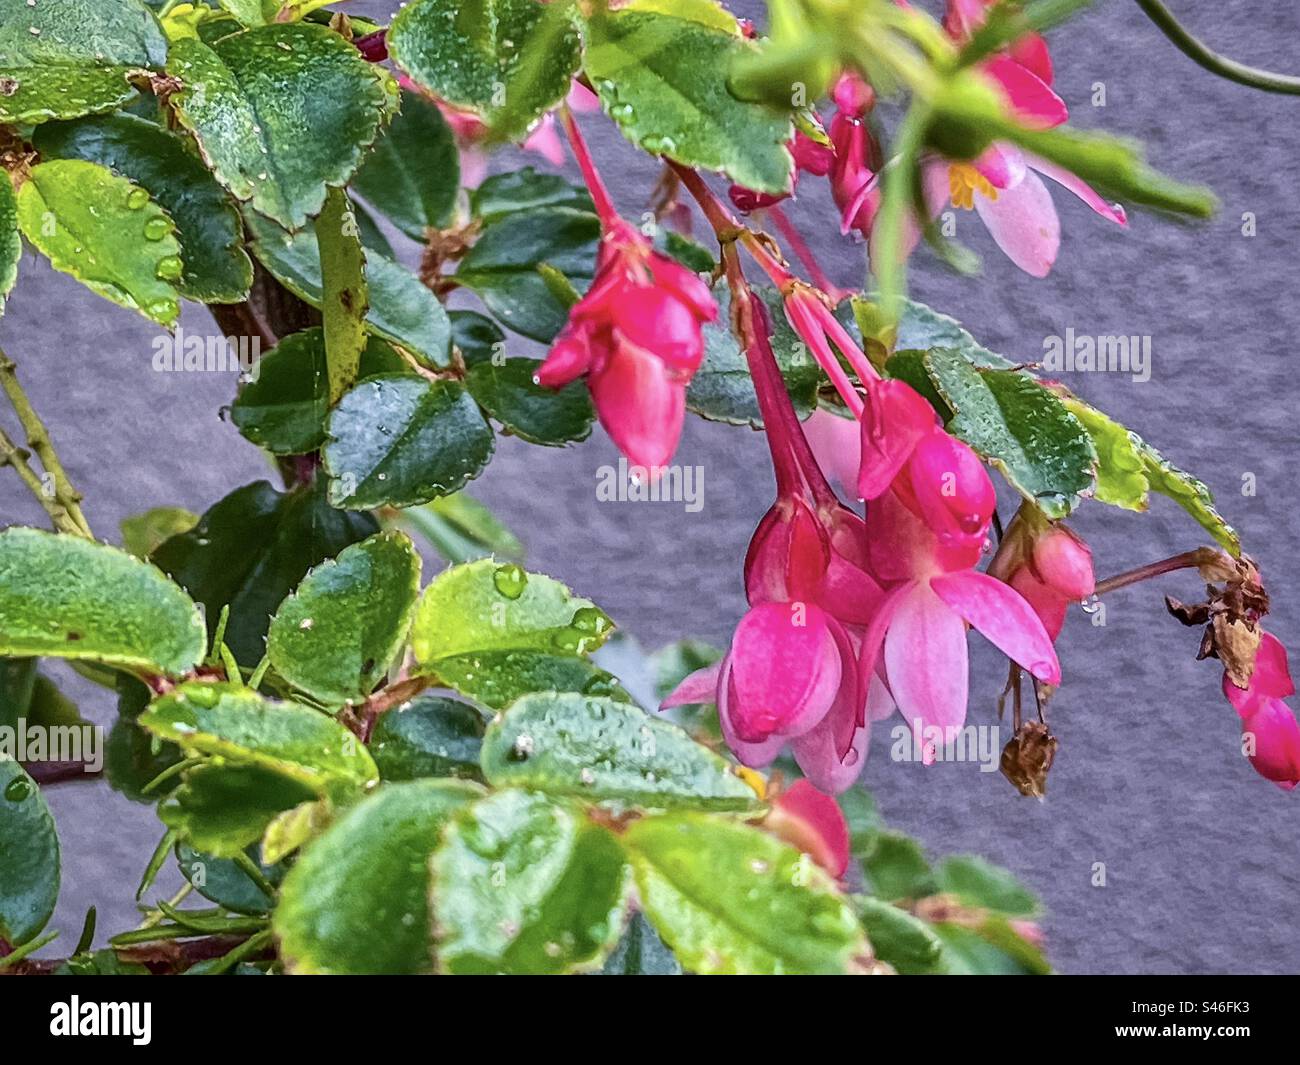 Close-up of bright pink flowers of Begonia fuchsioides or fuchsia begonia, also known as shrub begonia, plant with rain droplets on leaves and flowers, against wall. Stock Photo